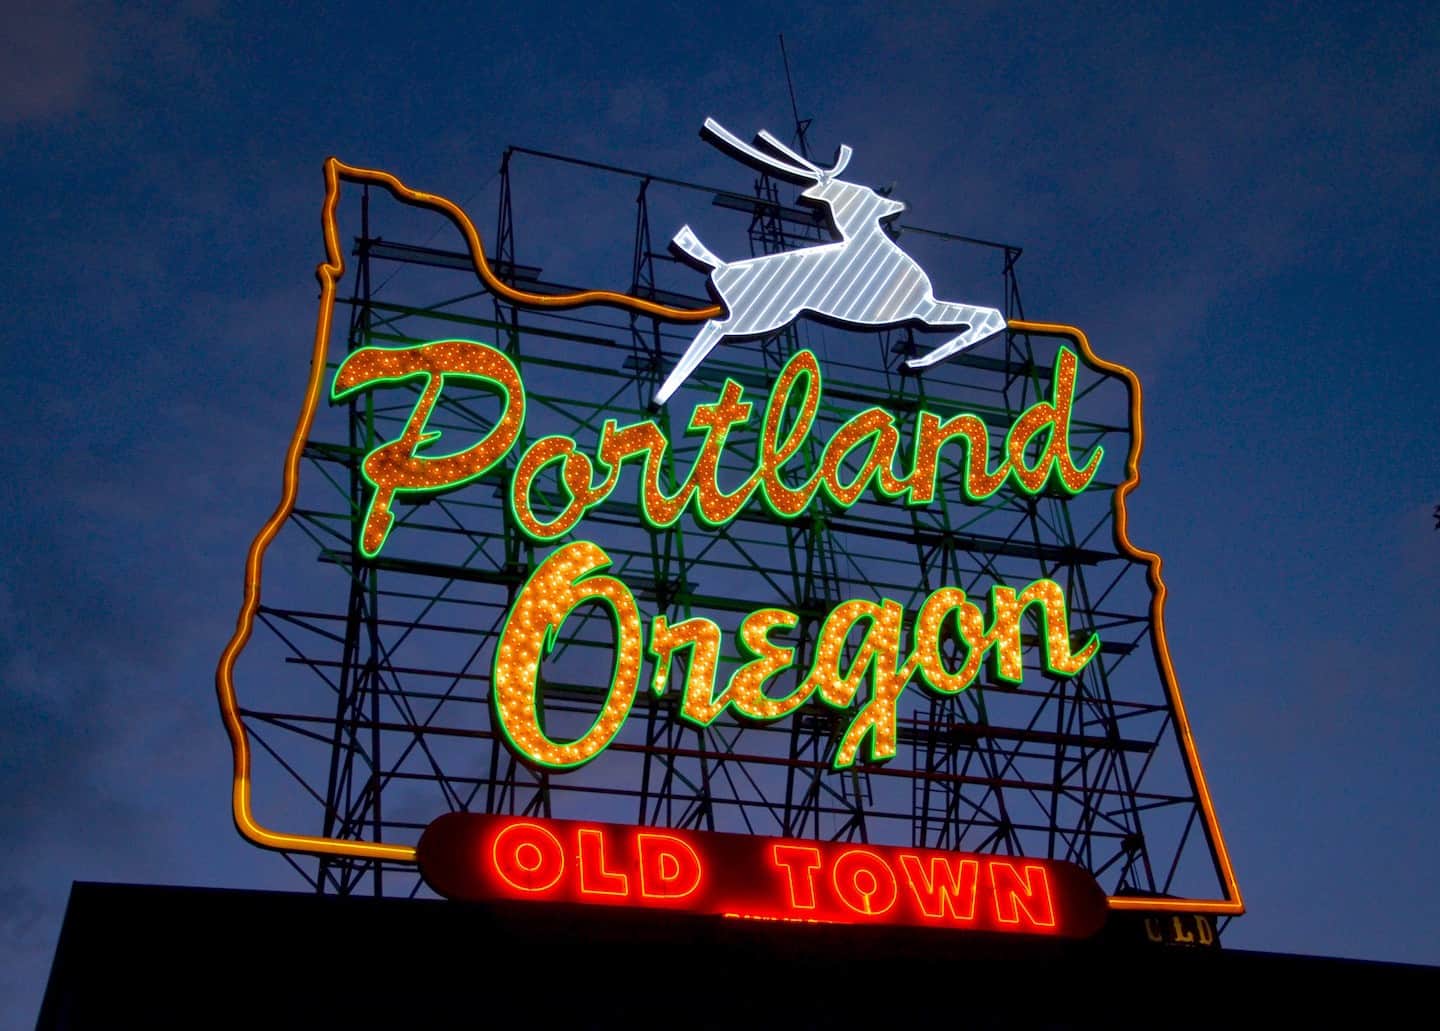 Portland's White Stag sign. Photo by Steve Morgan.